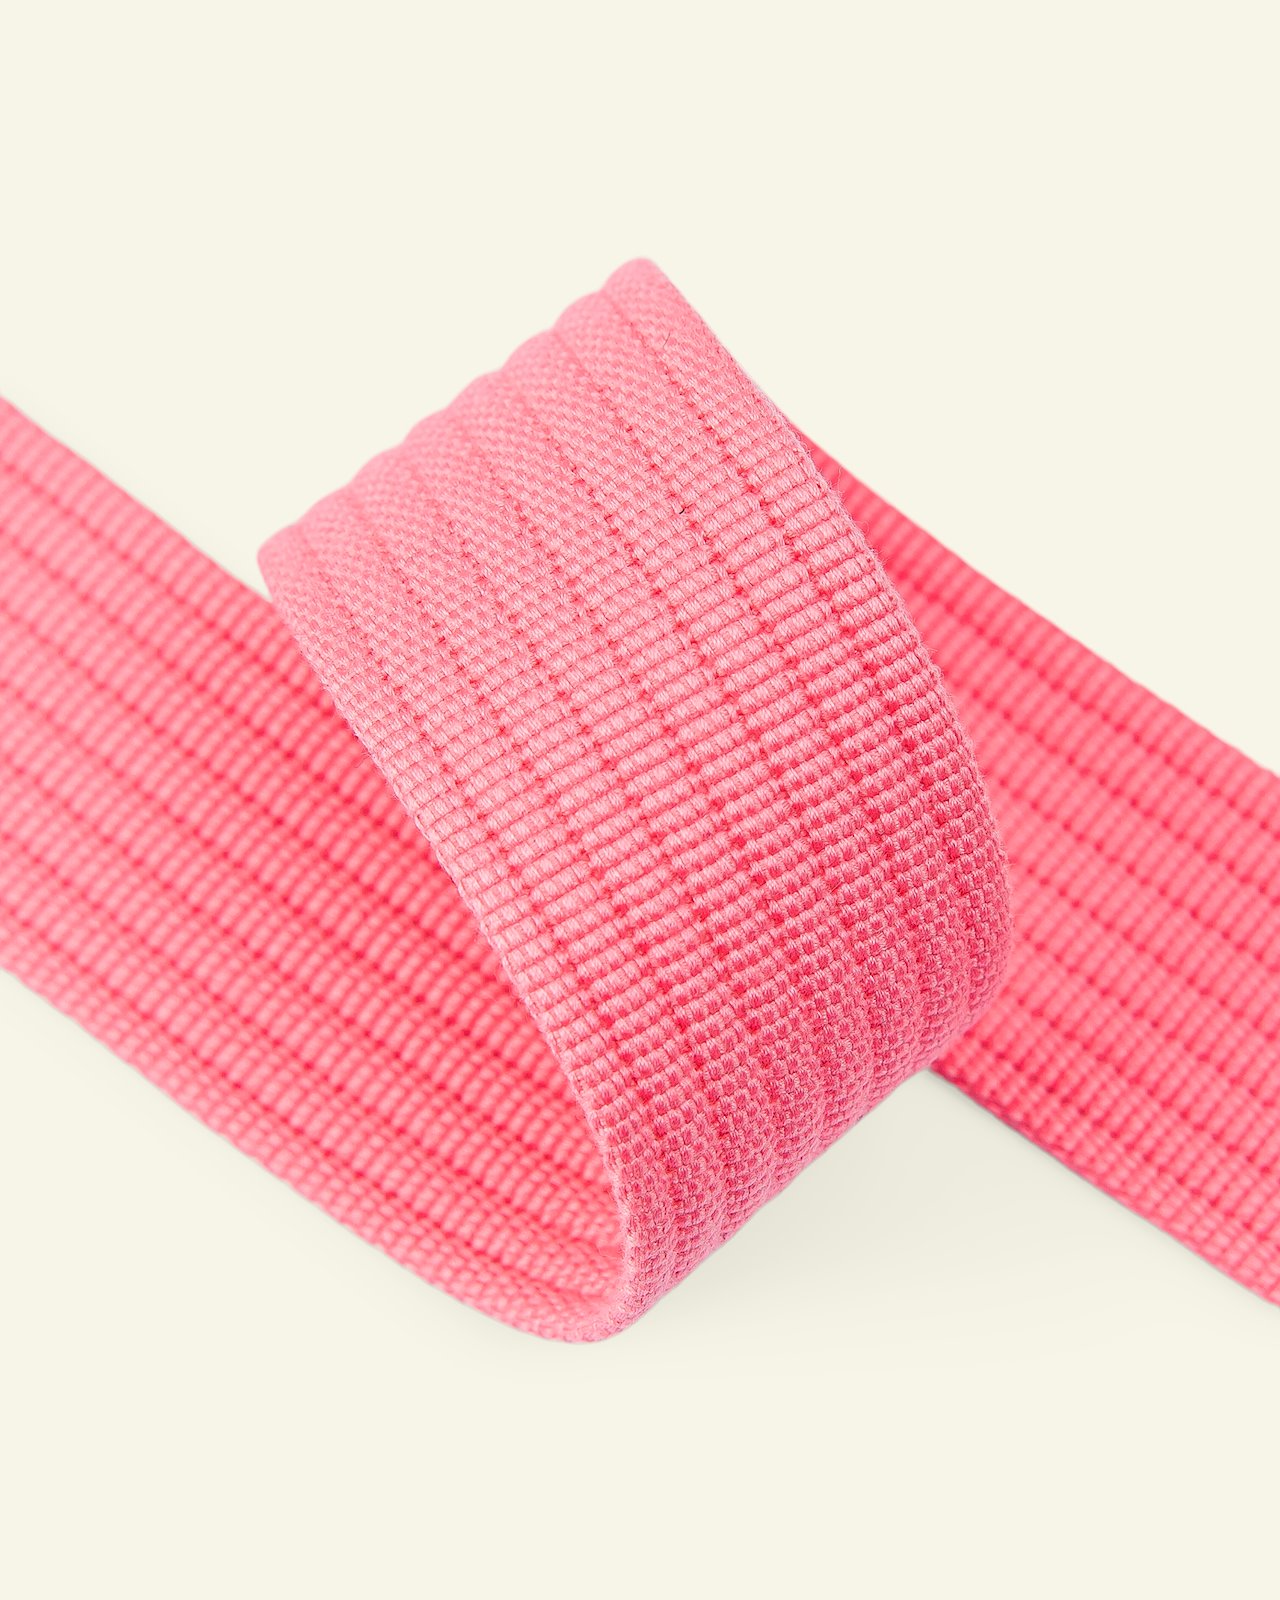 Ribbon woven 40mm pink 2m 22404_pack